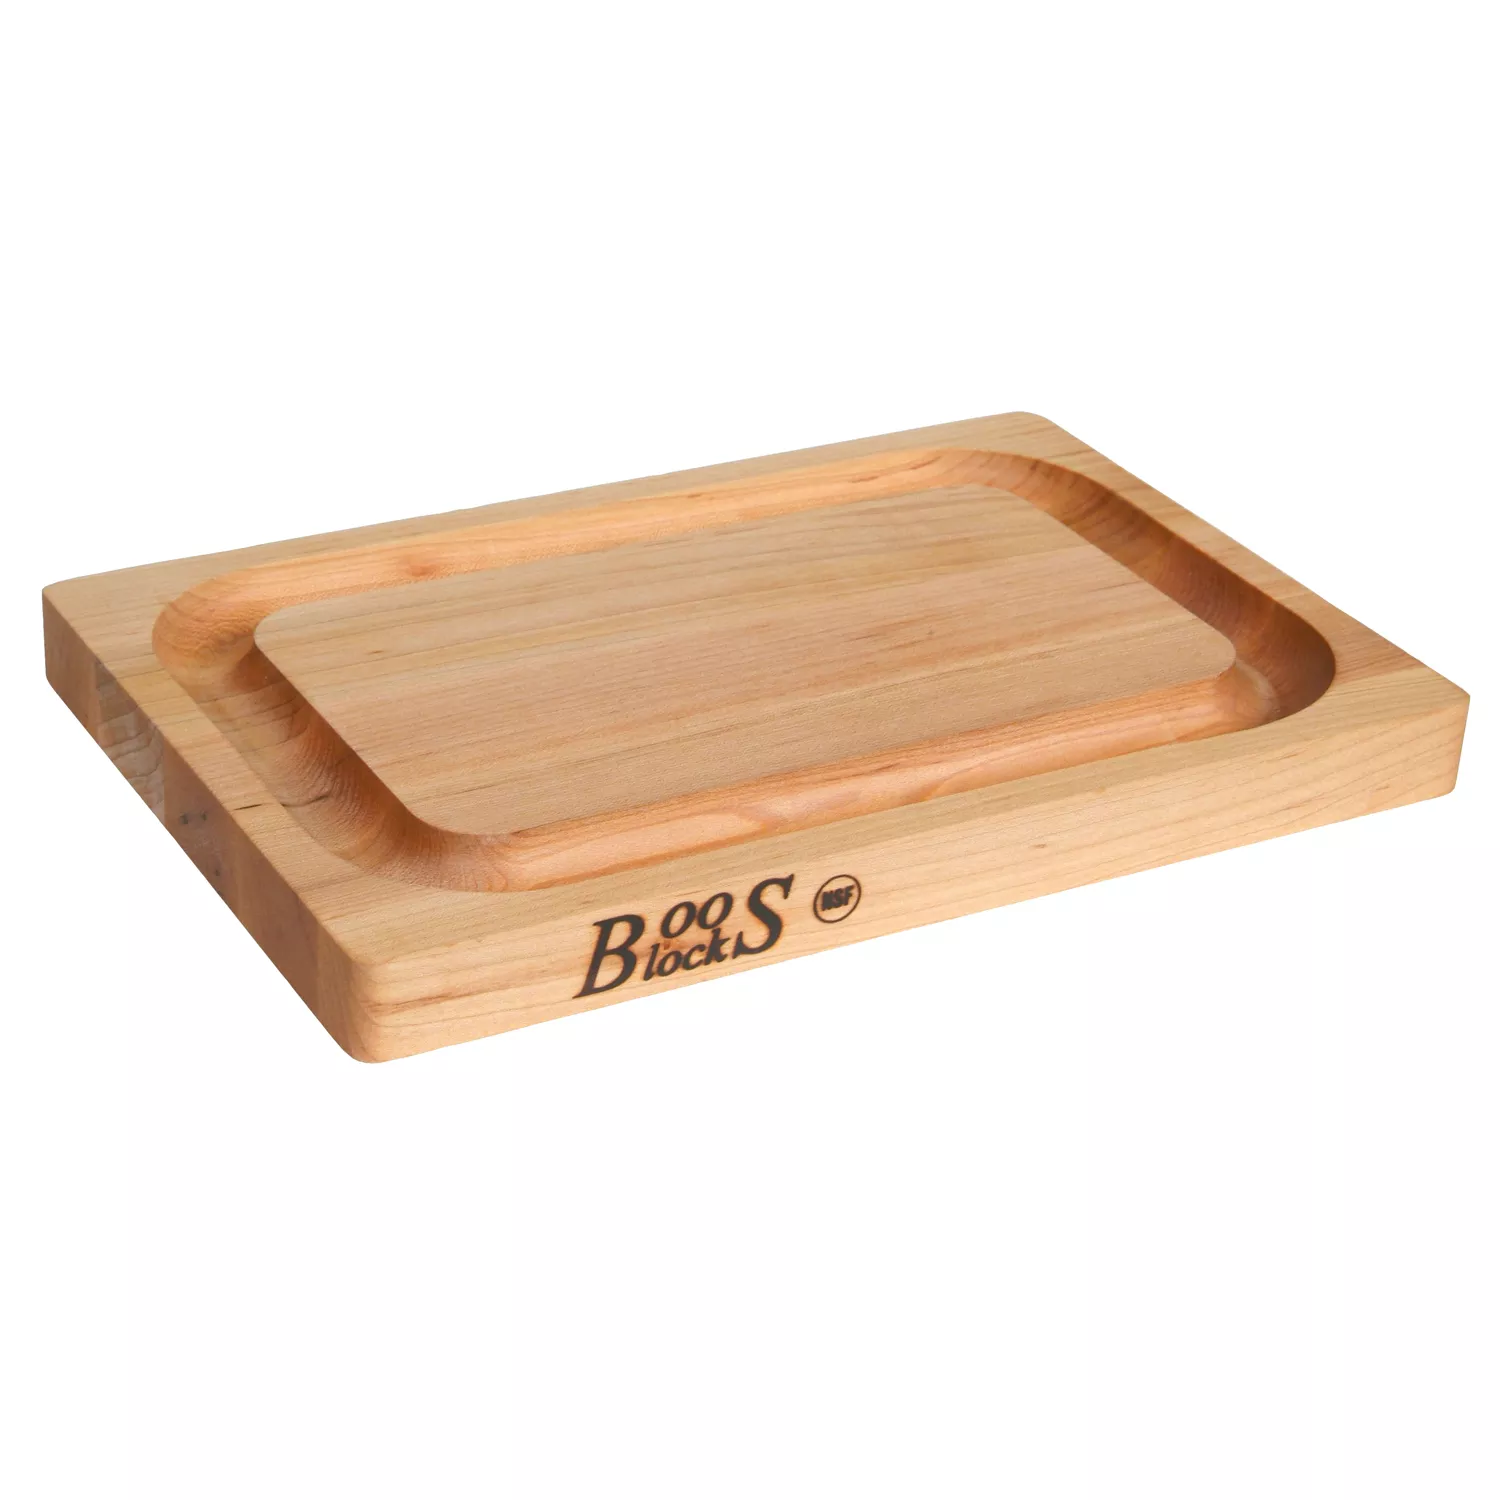 John Boos Maple Edge Grain Cutting Board with Juice Groove, 1" Thick